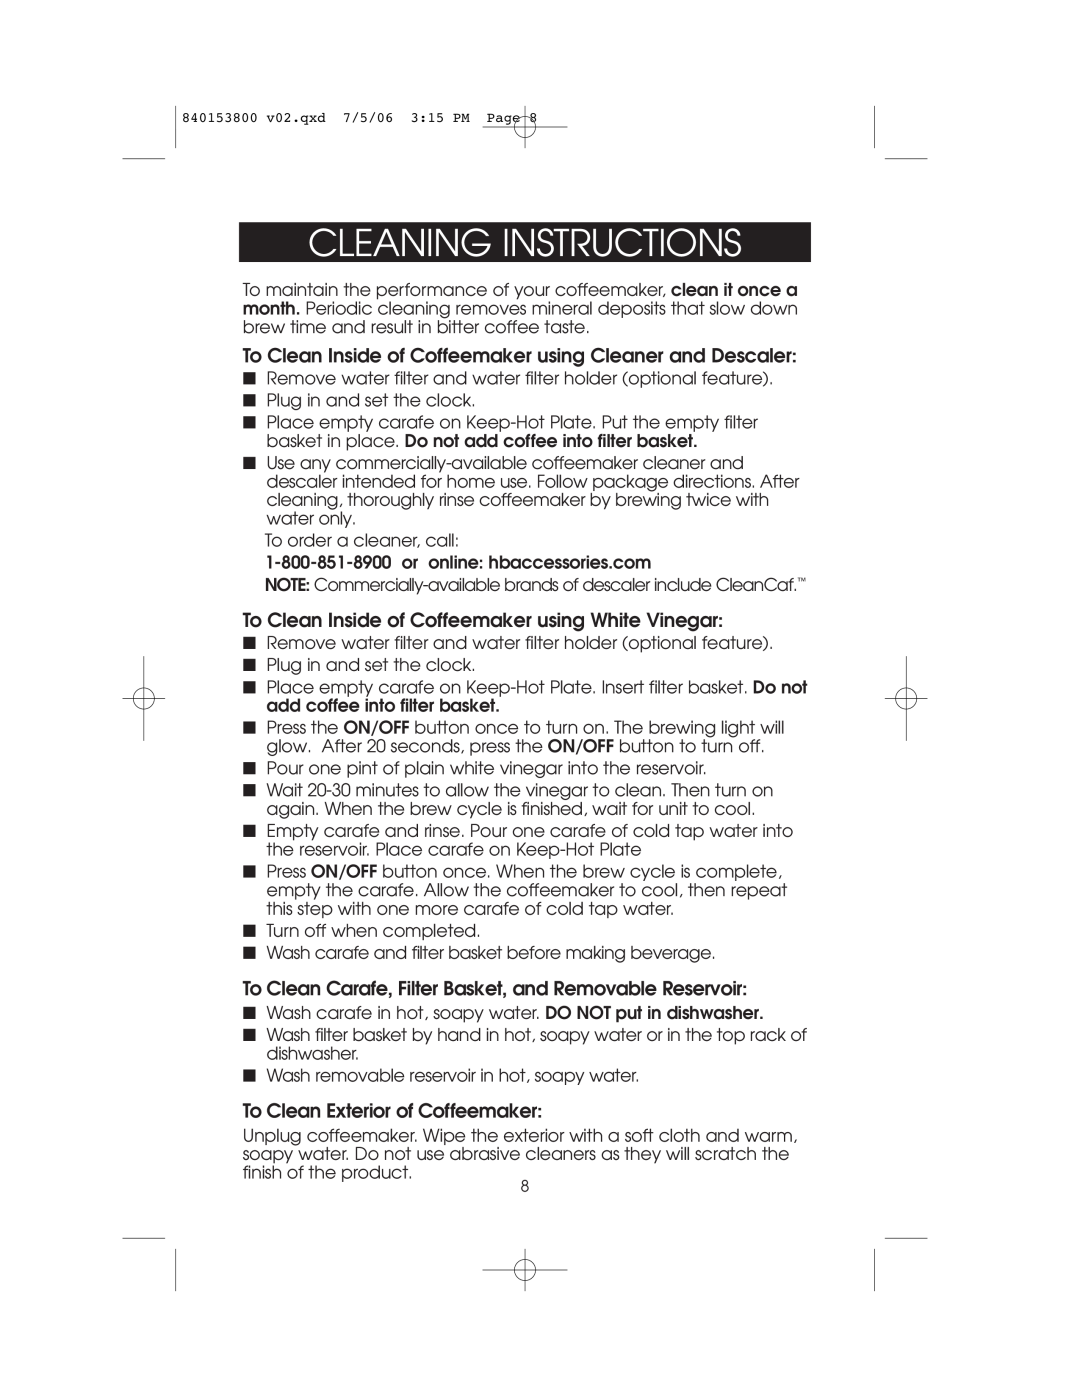 Hamilton Beach 840153800 owner manual Cleaning Instructions, To Clean Inside of Coffeemaker using Cleaner and Descaler 